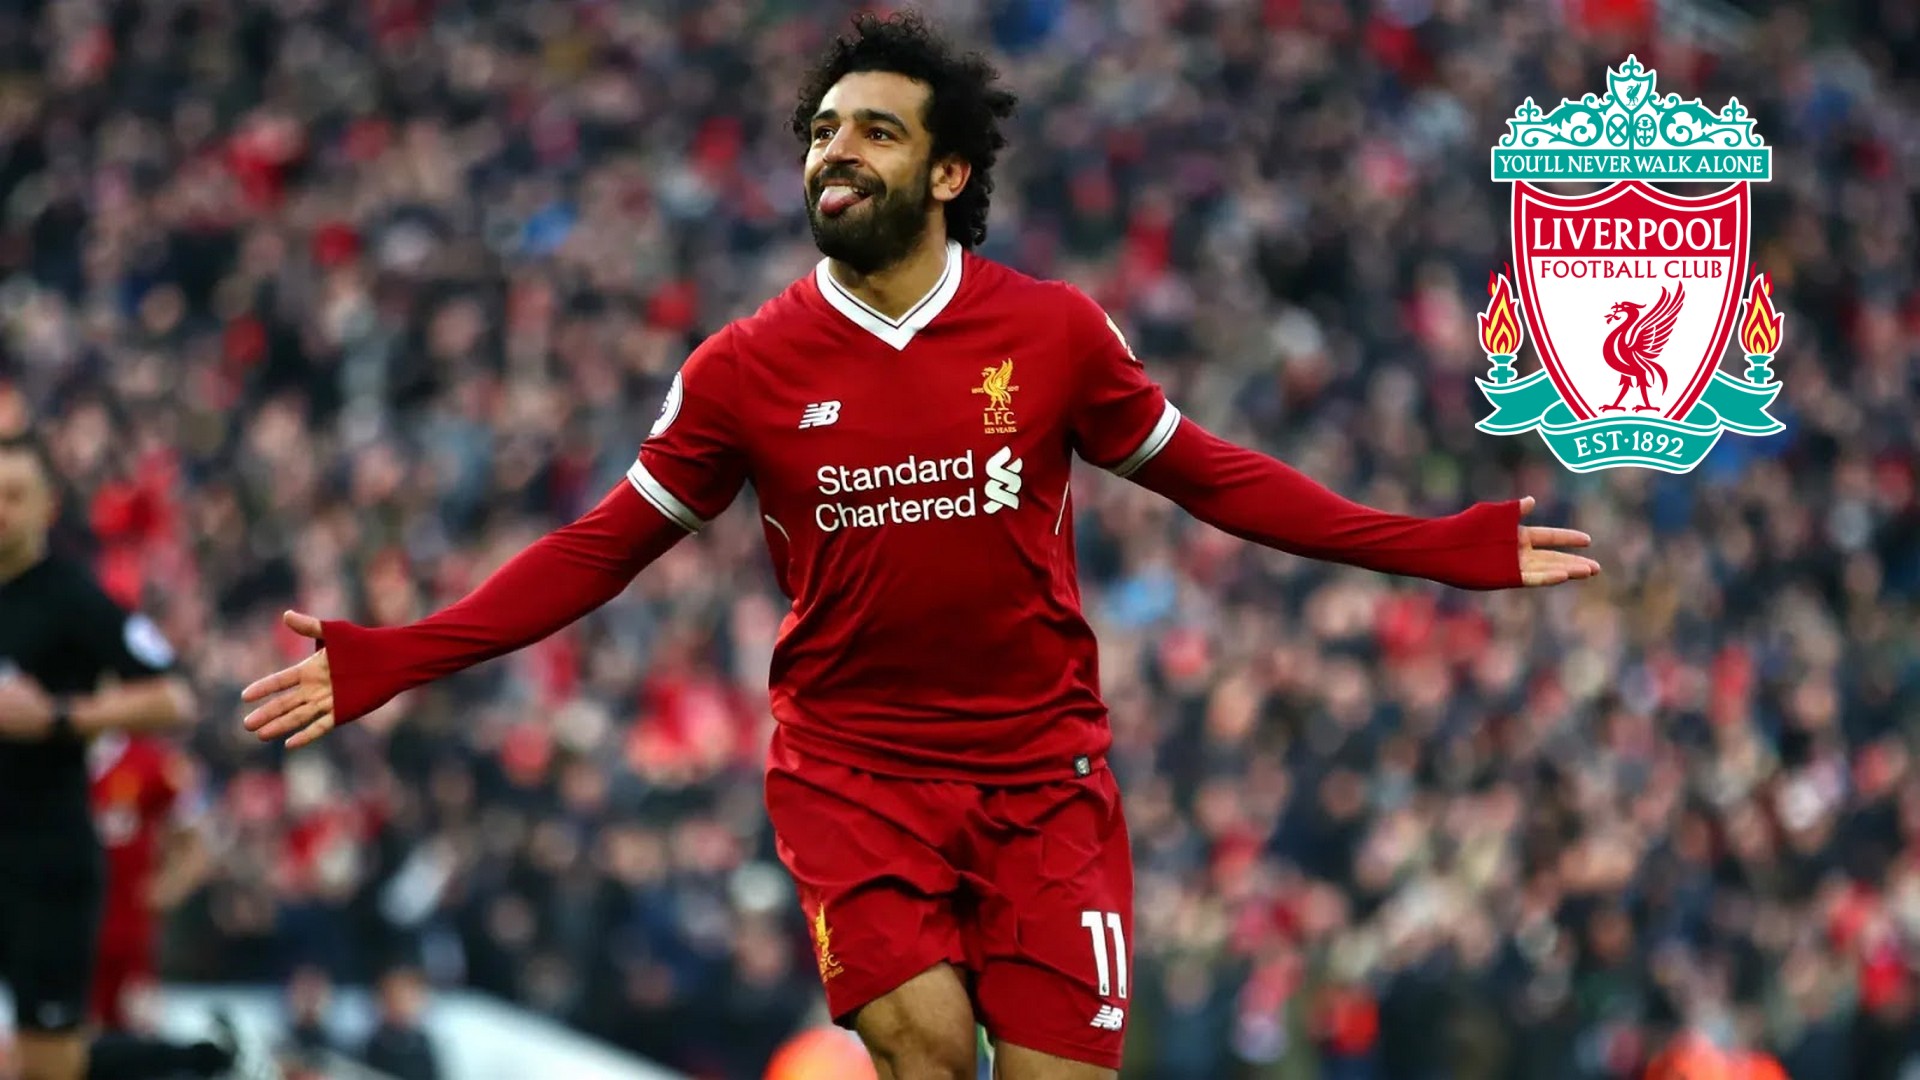 Mohamed Salah Wallpaper HD With Resolution 1920X1080 pixel. You can make this wallpaper for your Desktop Computer Backgrounds, Mac Wallpapers, Android Lock screen or iPhone Screensavers